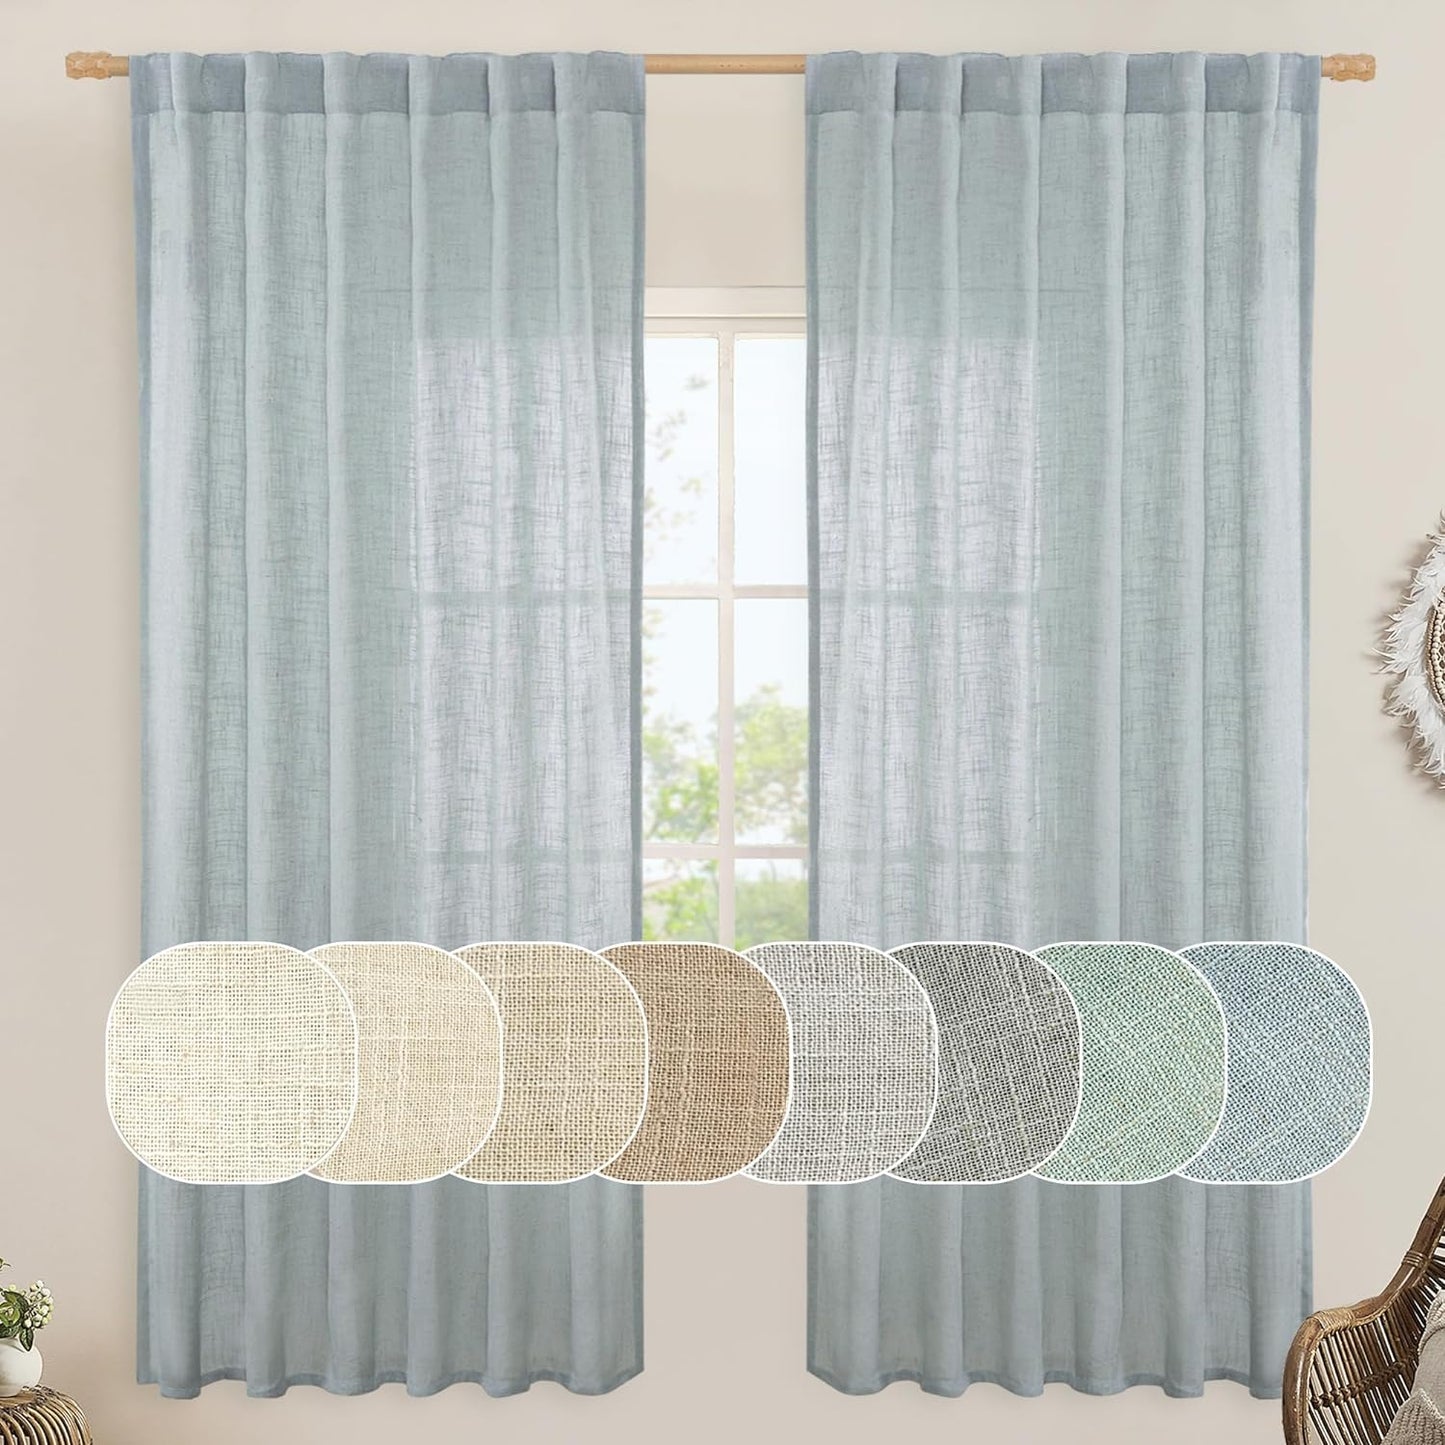 LAMIT Natural Linen Blended Curtains for Living Room, Back Tab and Rod Pocket Semi Sheer Curtains Light Filtering Country Rustic Drapes for Bedroom/Farmhouse, 2 Panels,52 X 108 Inch, Linen  LAMIT Greyish Blue 52W X 72L 